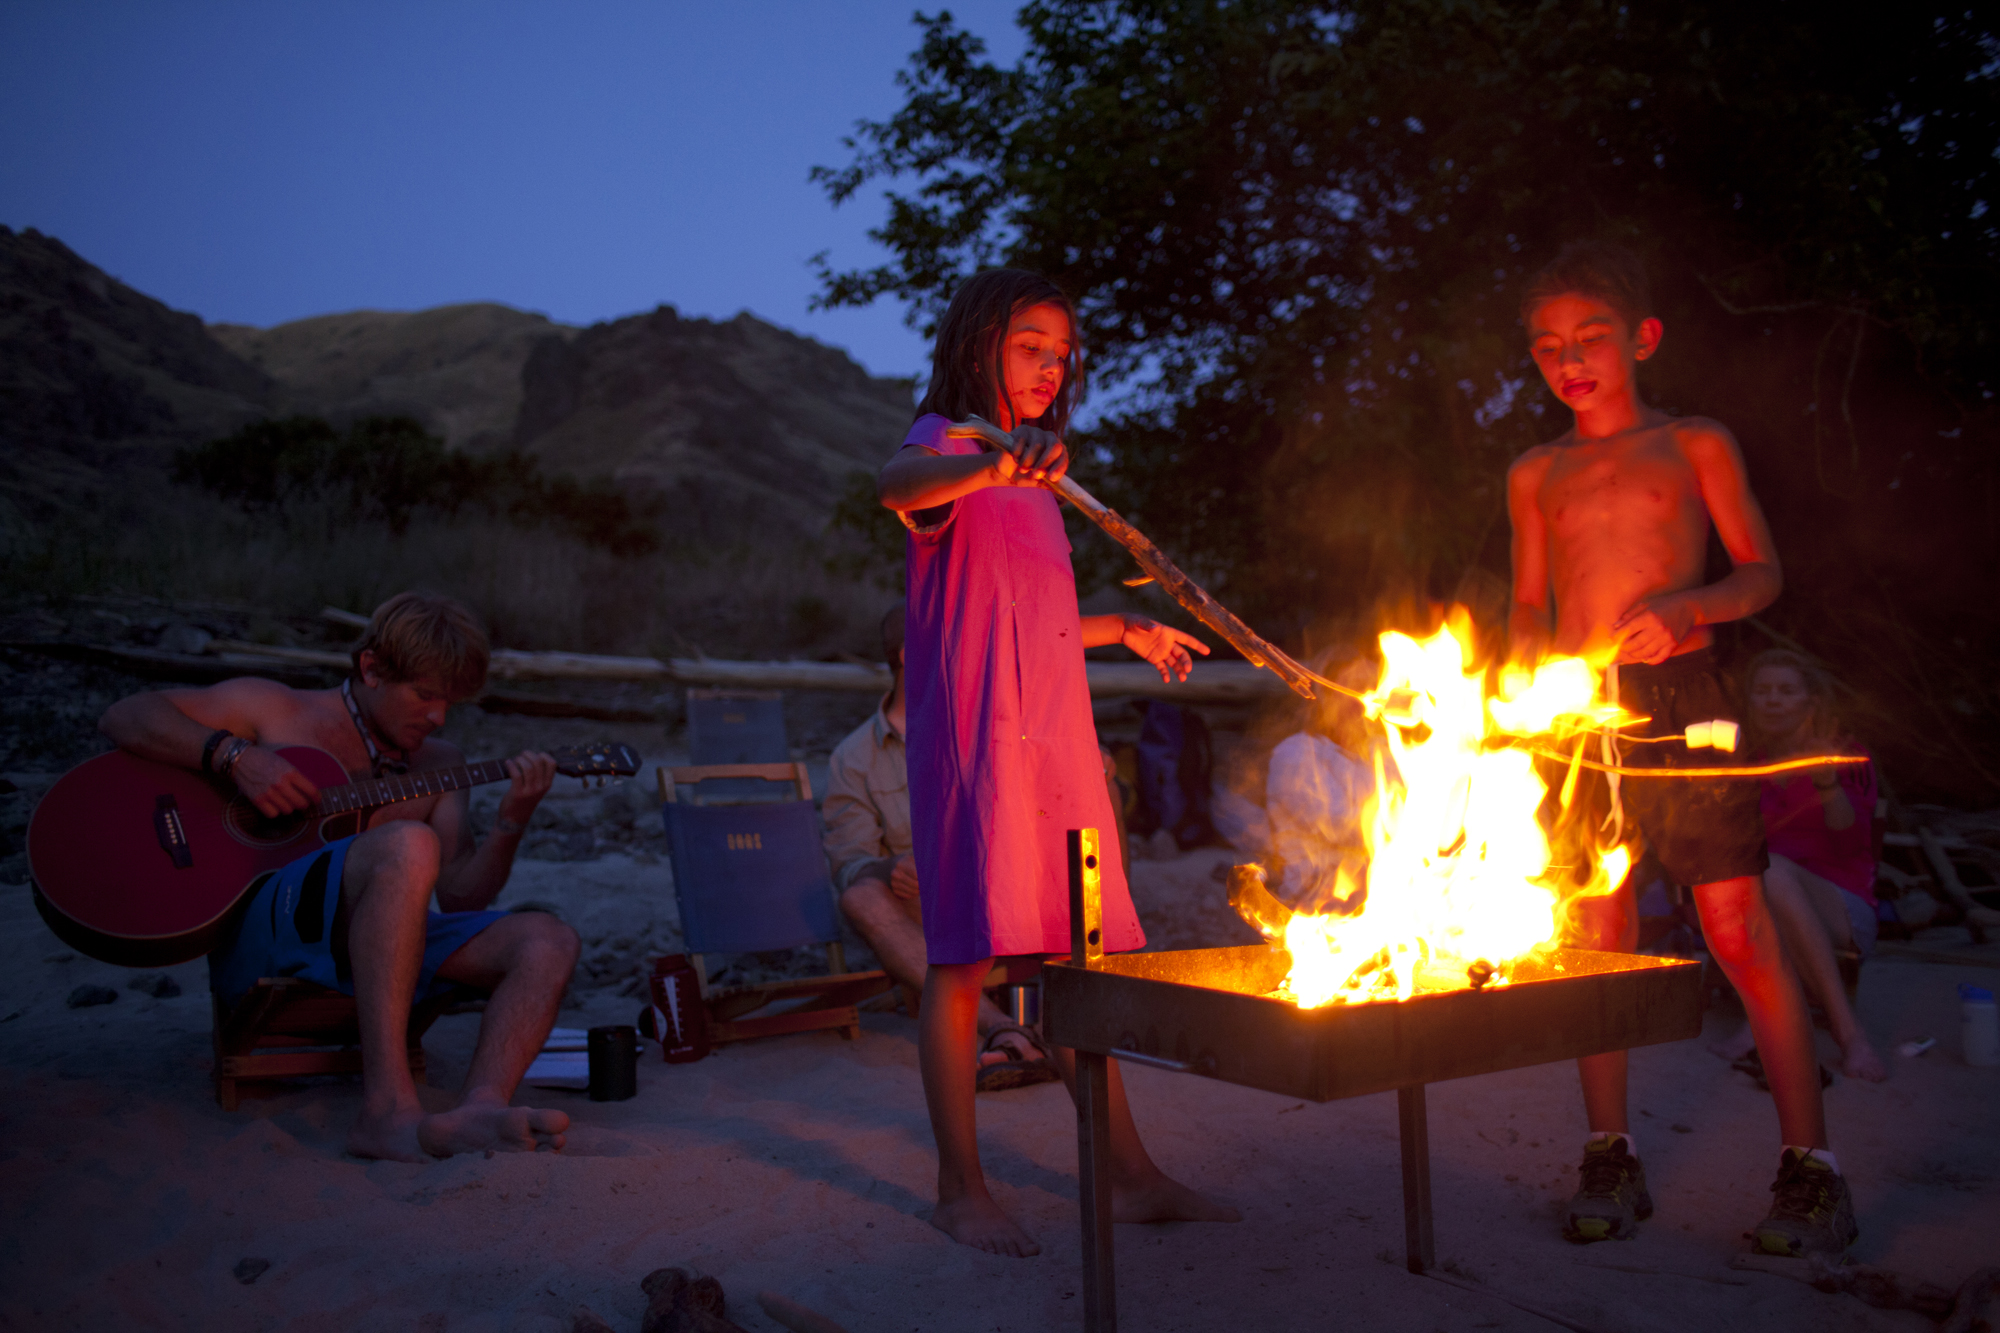 Children at a campfire on an unplugged vacation with their family